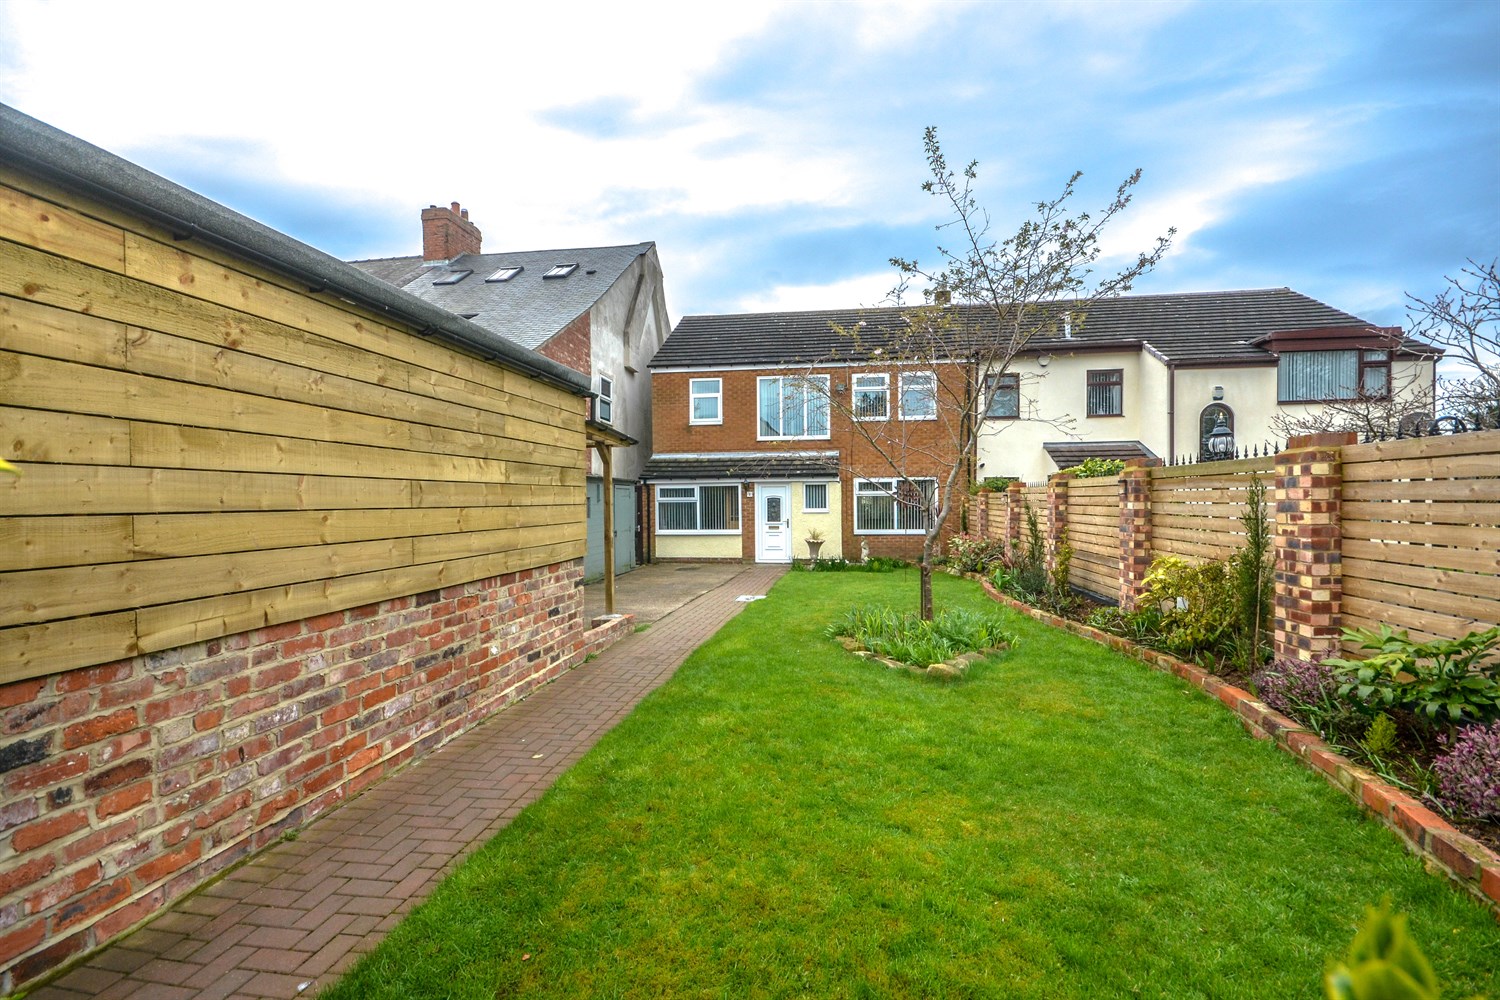 3 bed semi-detached house for sale in St. Nicholas Road, West Boldon - Property Image 1